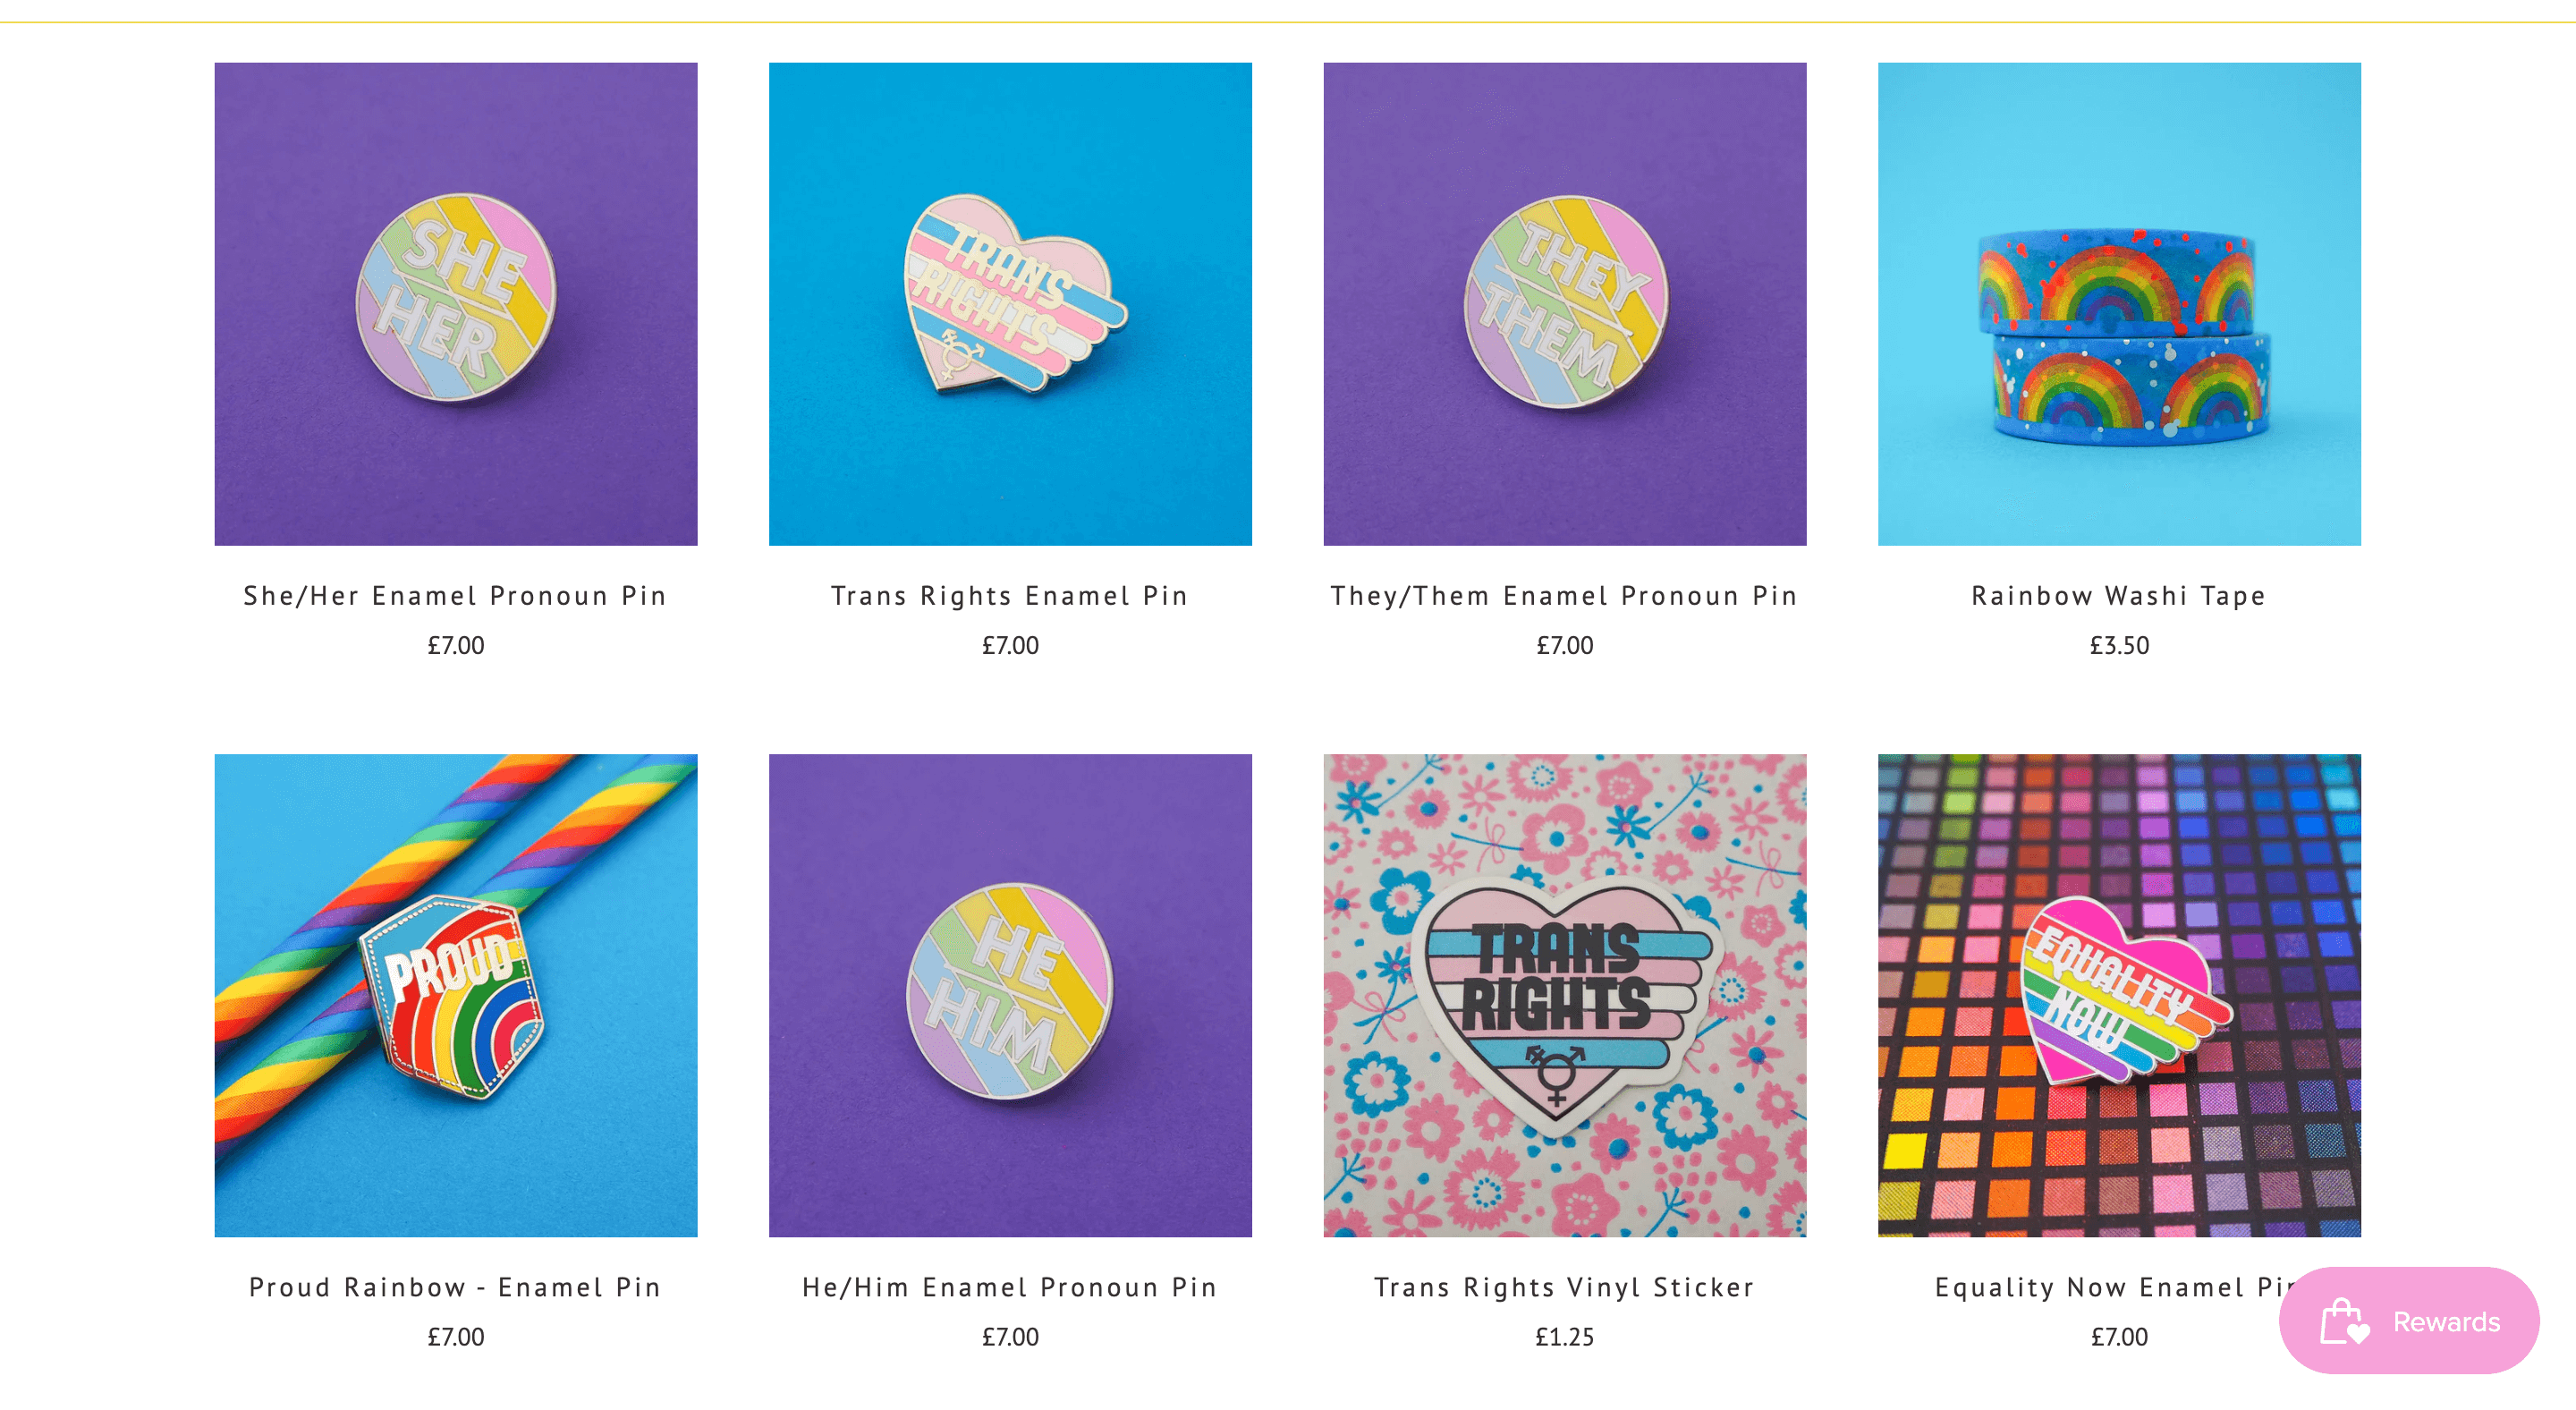 An image of Hand Over Your Fairy Cakes’ Pride collection product catalog page on its website. There are images and descriptions of 8 products: She/Her enamel pronoun pin, Trans Rights enamel pin, They/Them enamel pronoun pin, Rainbow washi tape, Proud Rainbow enamel pin, He/Him enamel pronoun pin, Trans Rights vinyl sticker, and the Equality Now enamel pin.